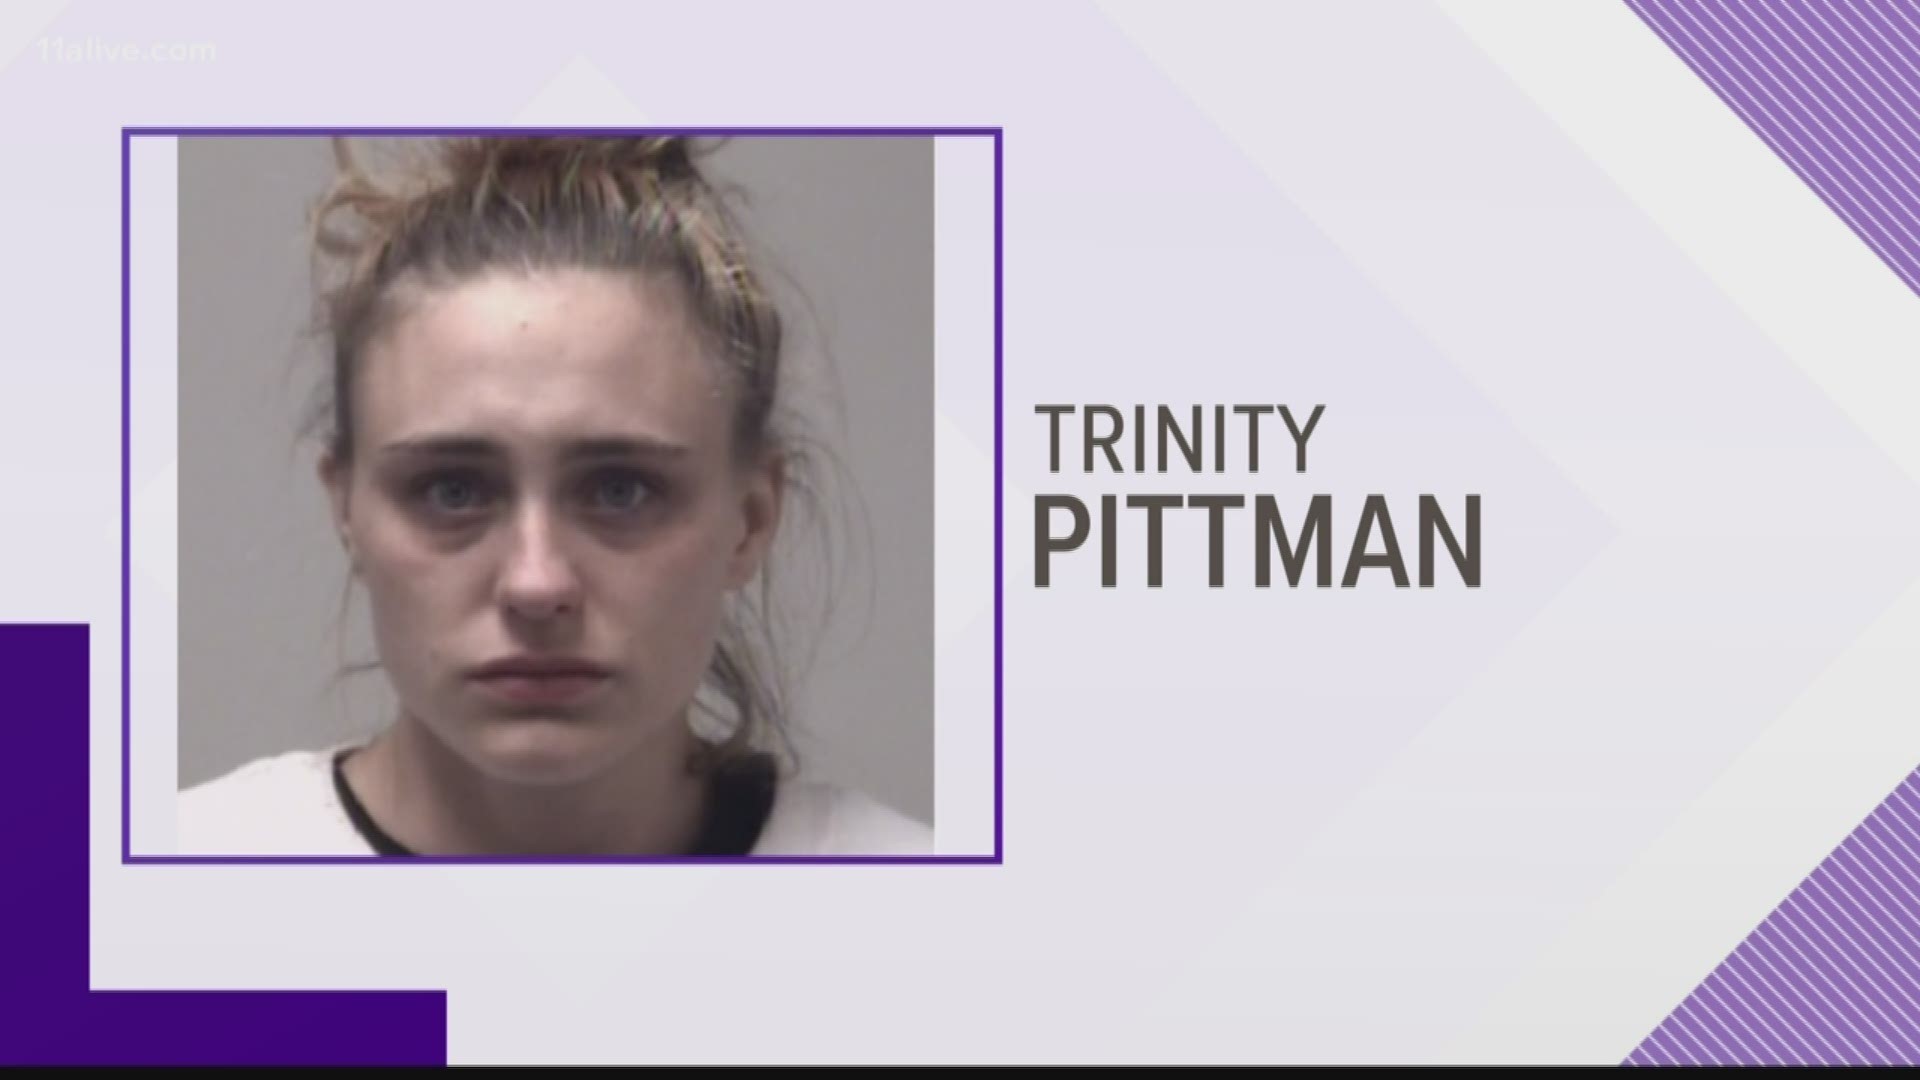 Trinity Pittman, of Palmetto, is charged with murder and child cruelty in the death of her 20-month-old son, Conner Perry.